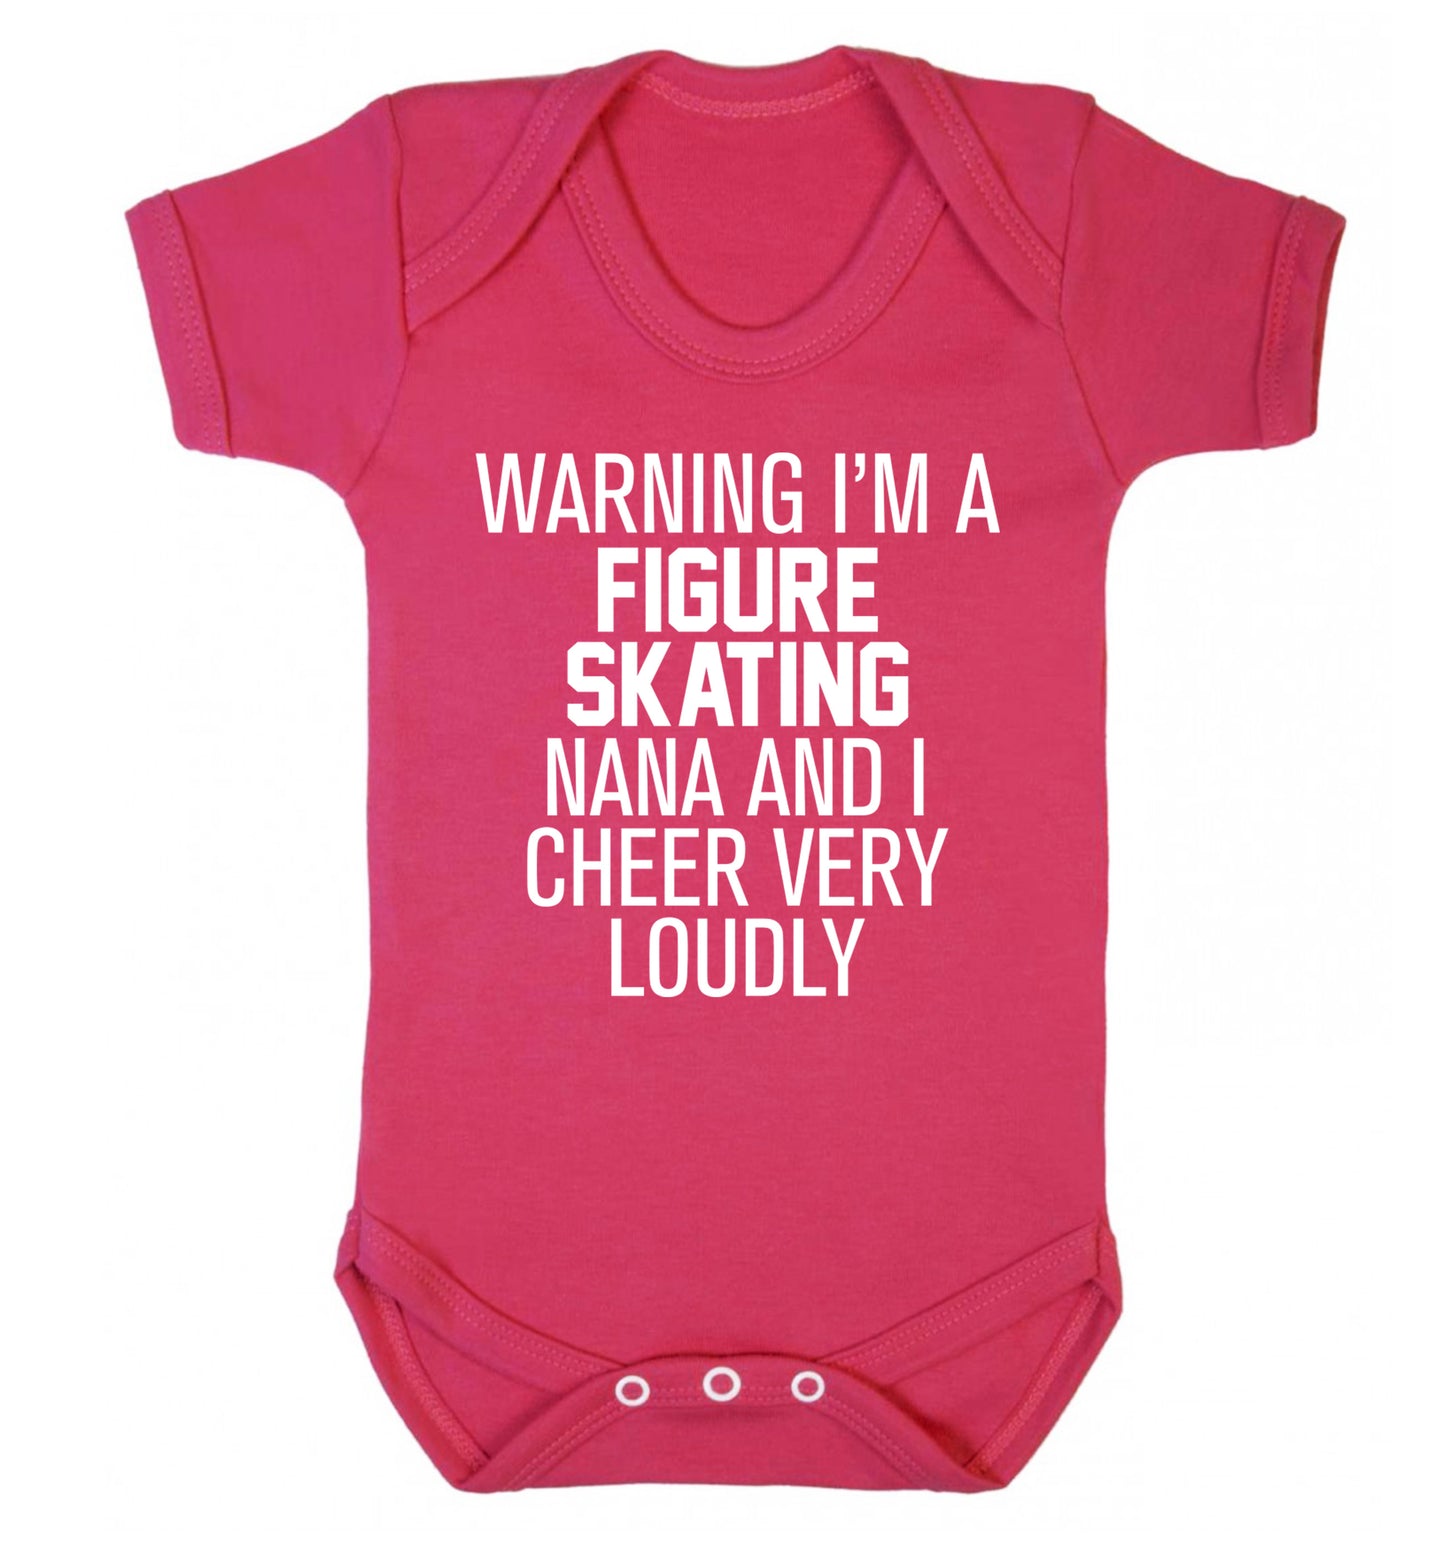 Warning I'm a figure skating nana and I cheer very loudly Baby Vest dark pink 18-24 months